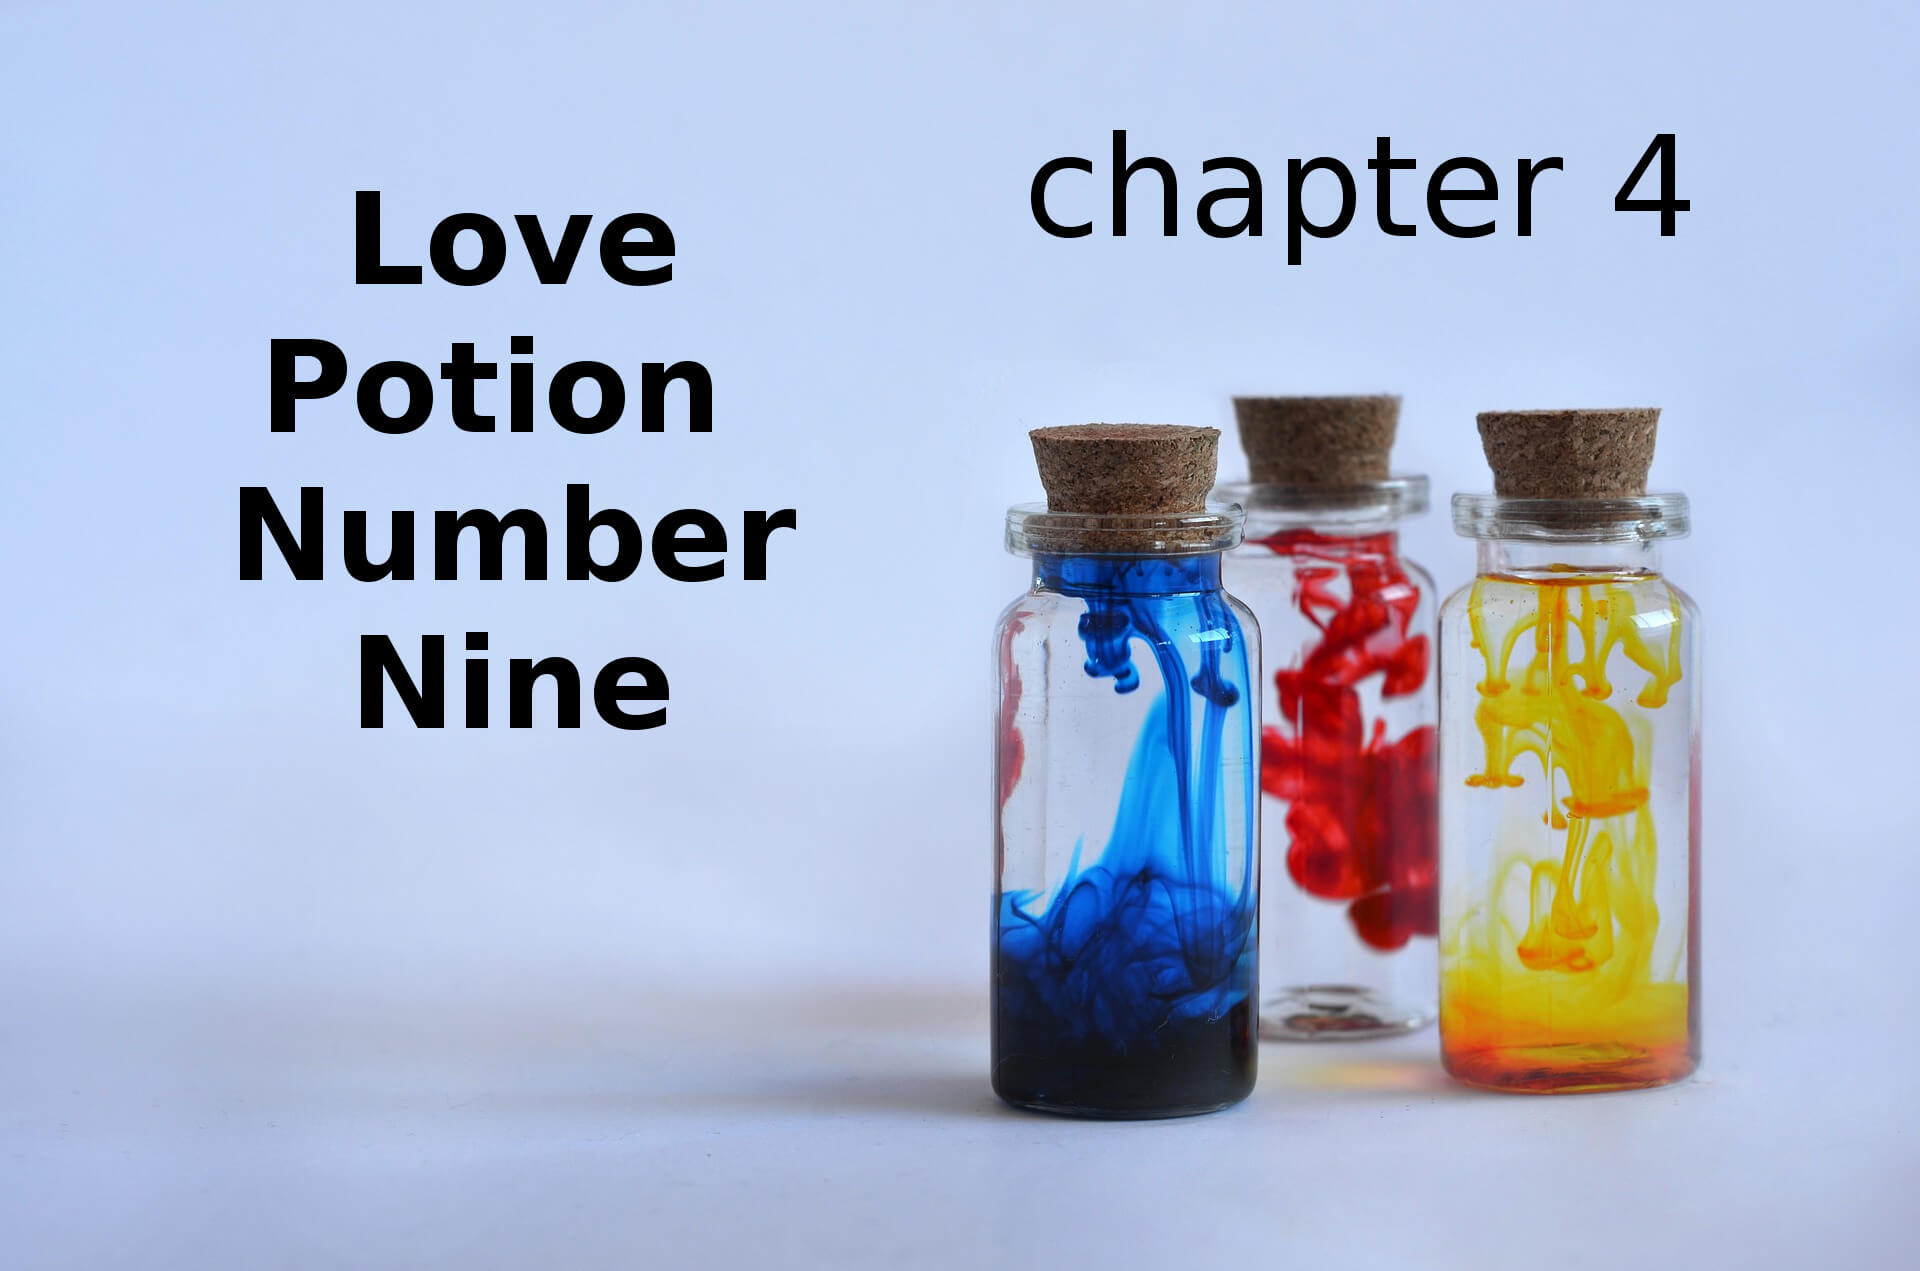 Love Potion Number Nine chapter 4 Zorro fanfiction